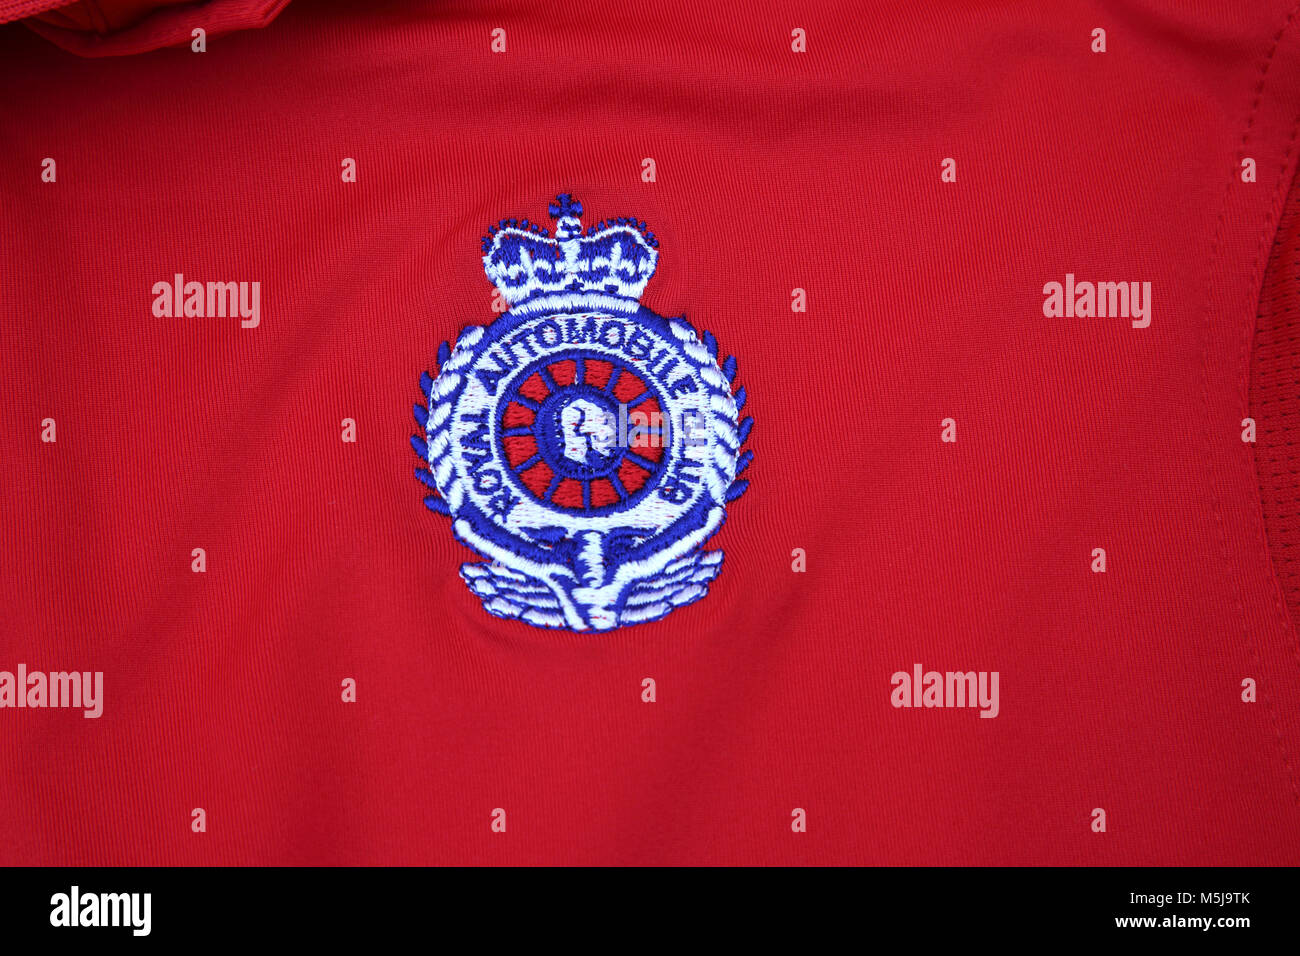 Close up Of Royal Automobile Club Logo on Red Shirt Stock Photo